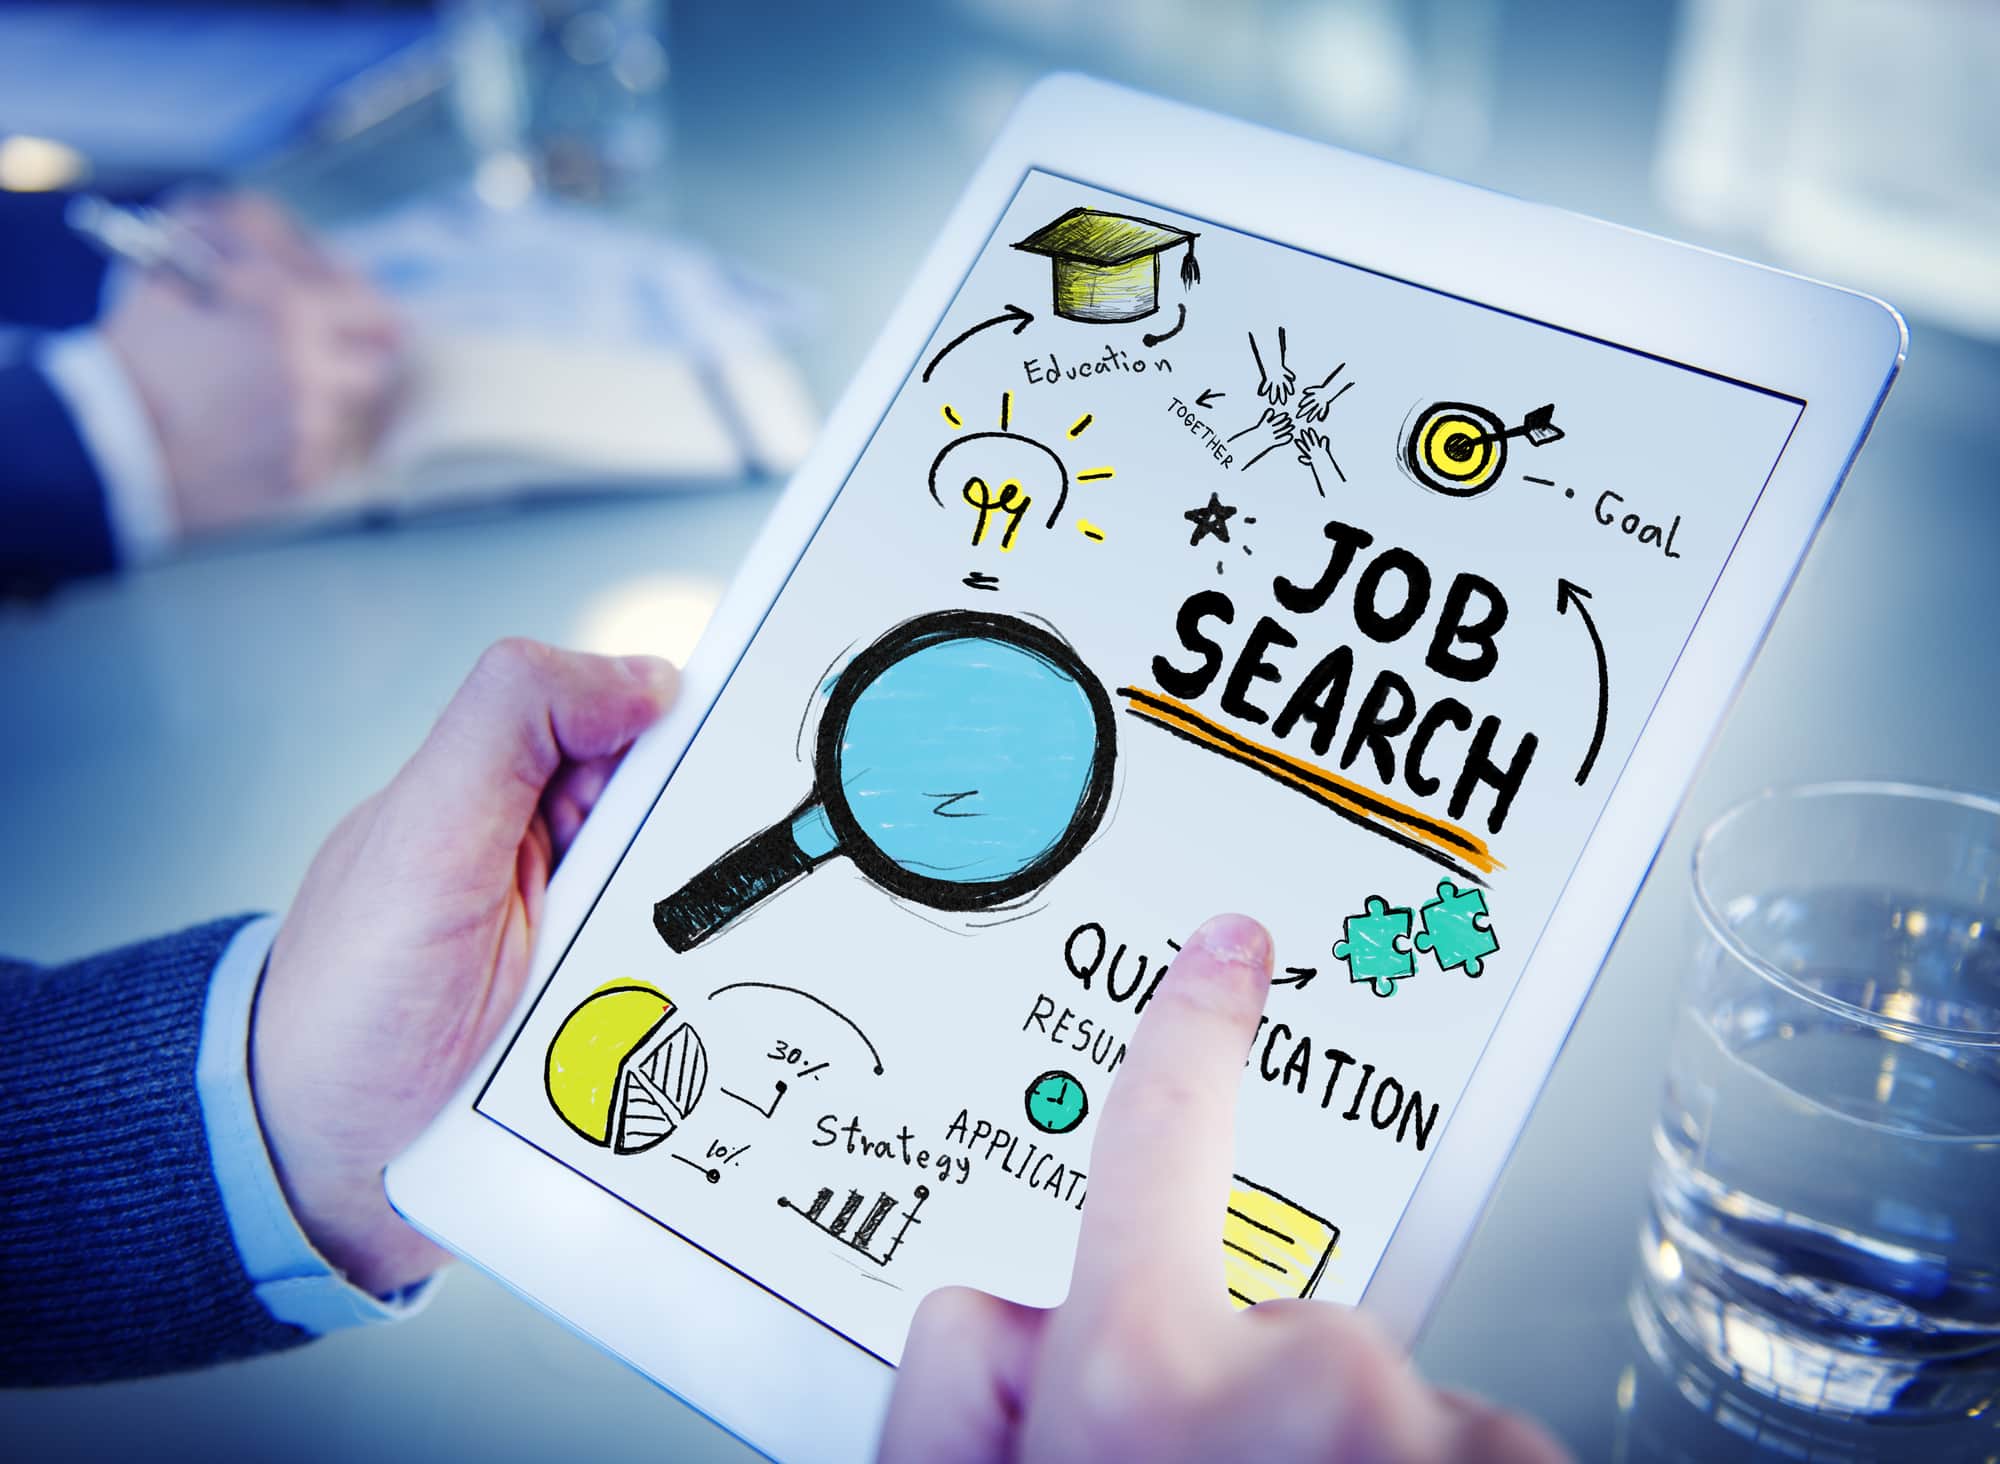 Change your job search strategy to win new executive roles